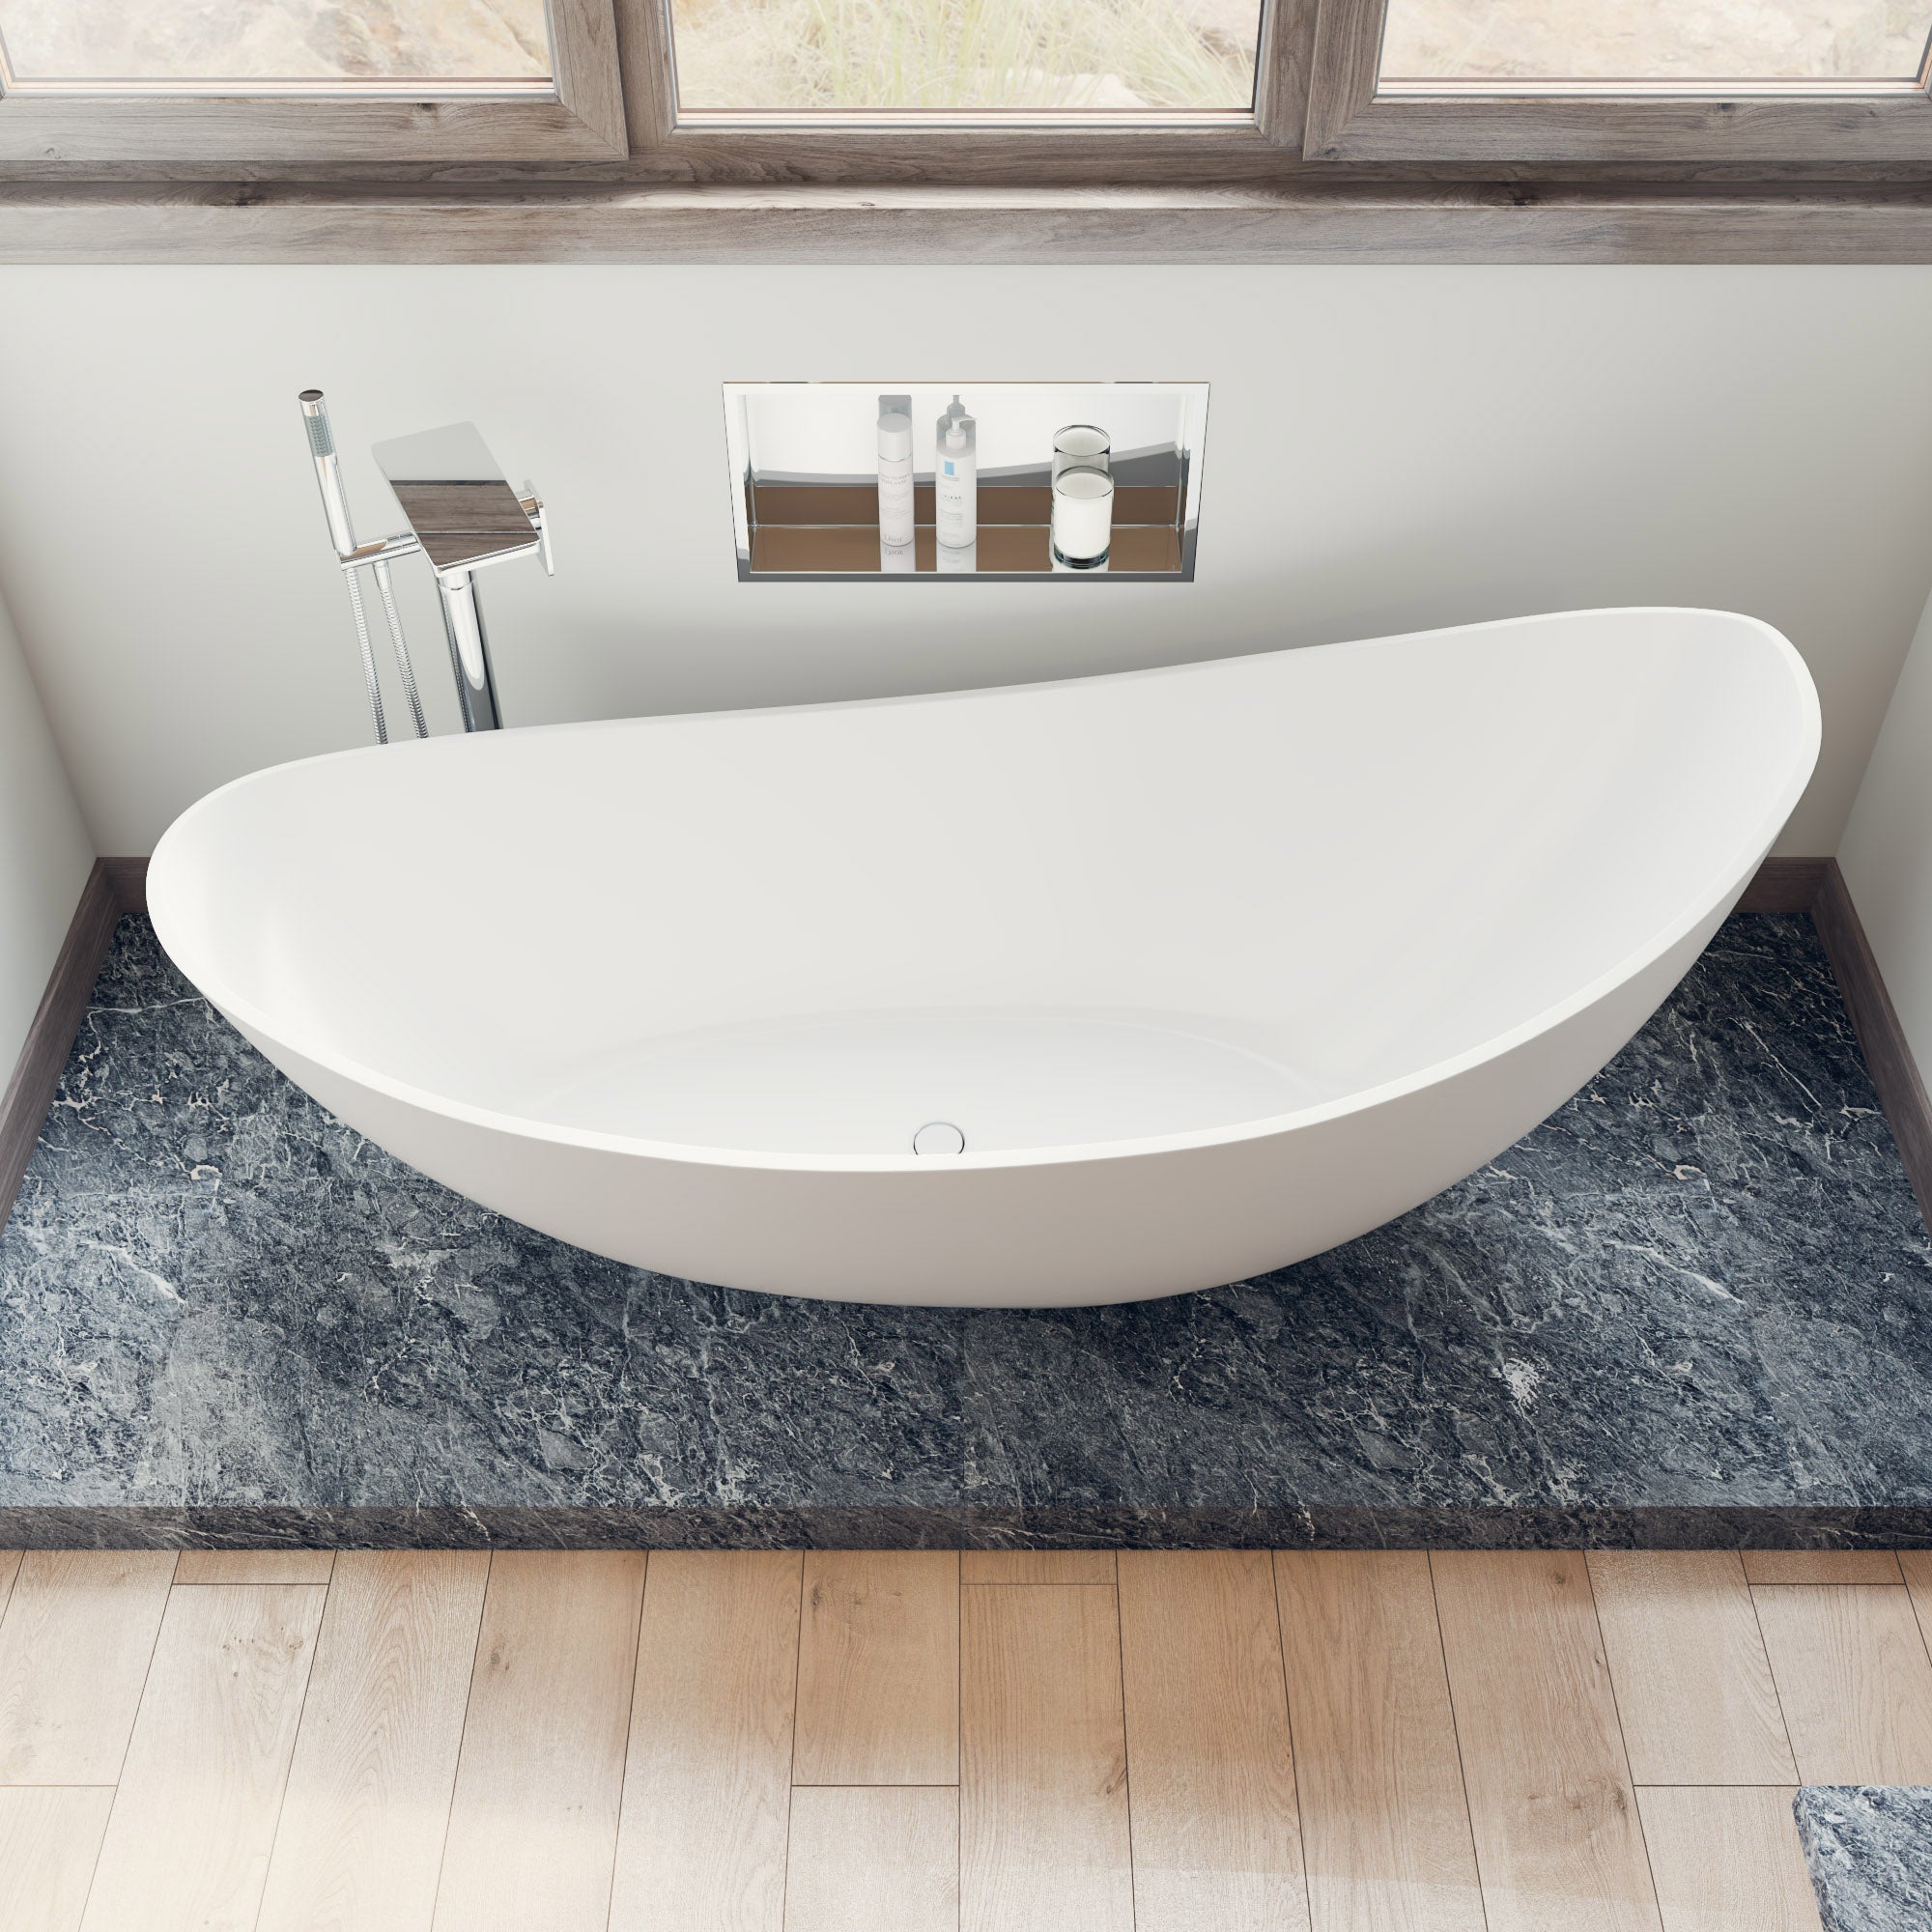 ALFI AB9951 73" White Solid Surface Smooth Resin Soaking Slipper Bathtub  with a matte finish in a white background